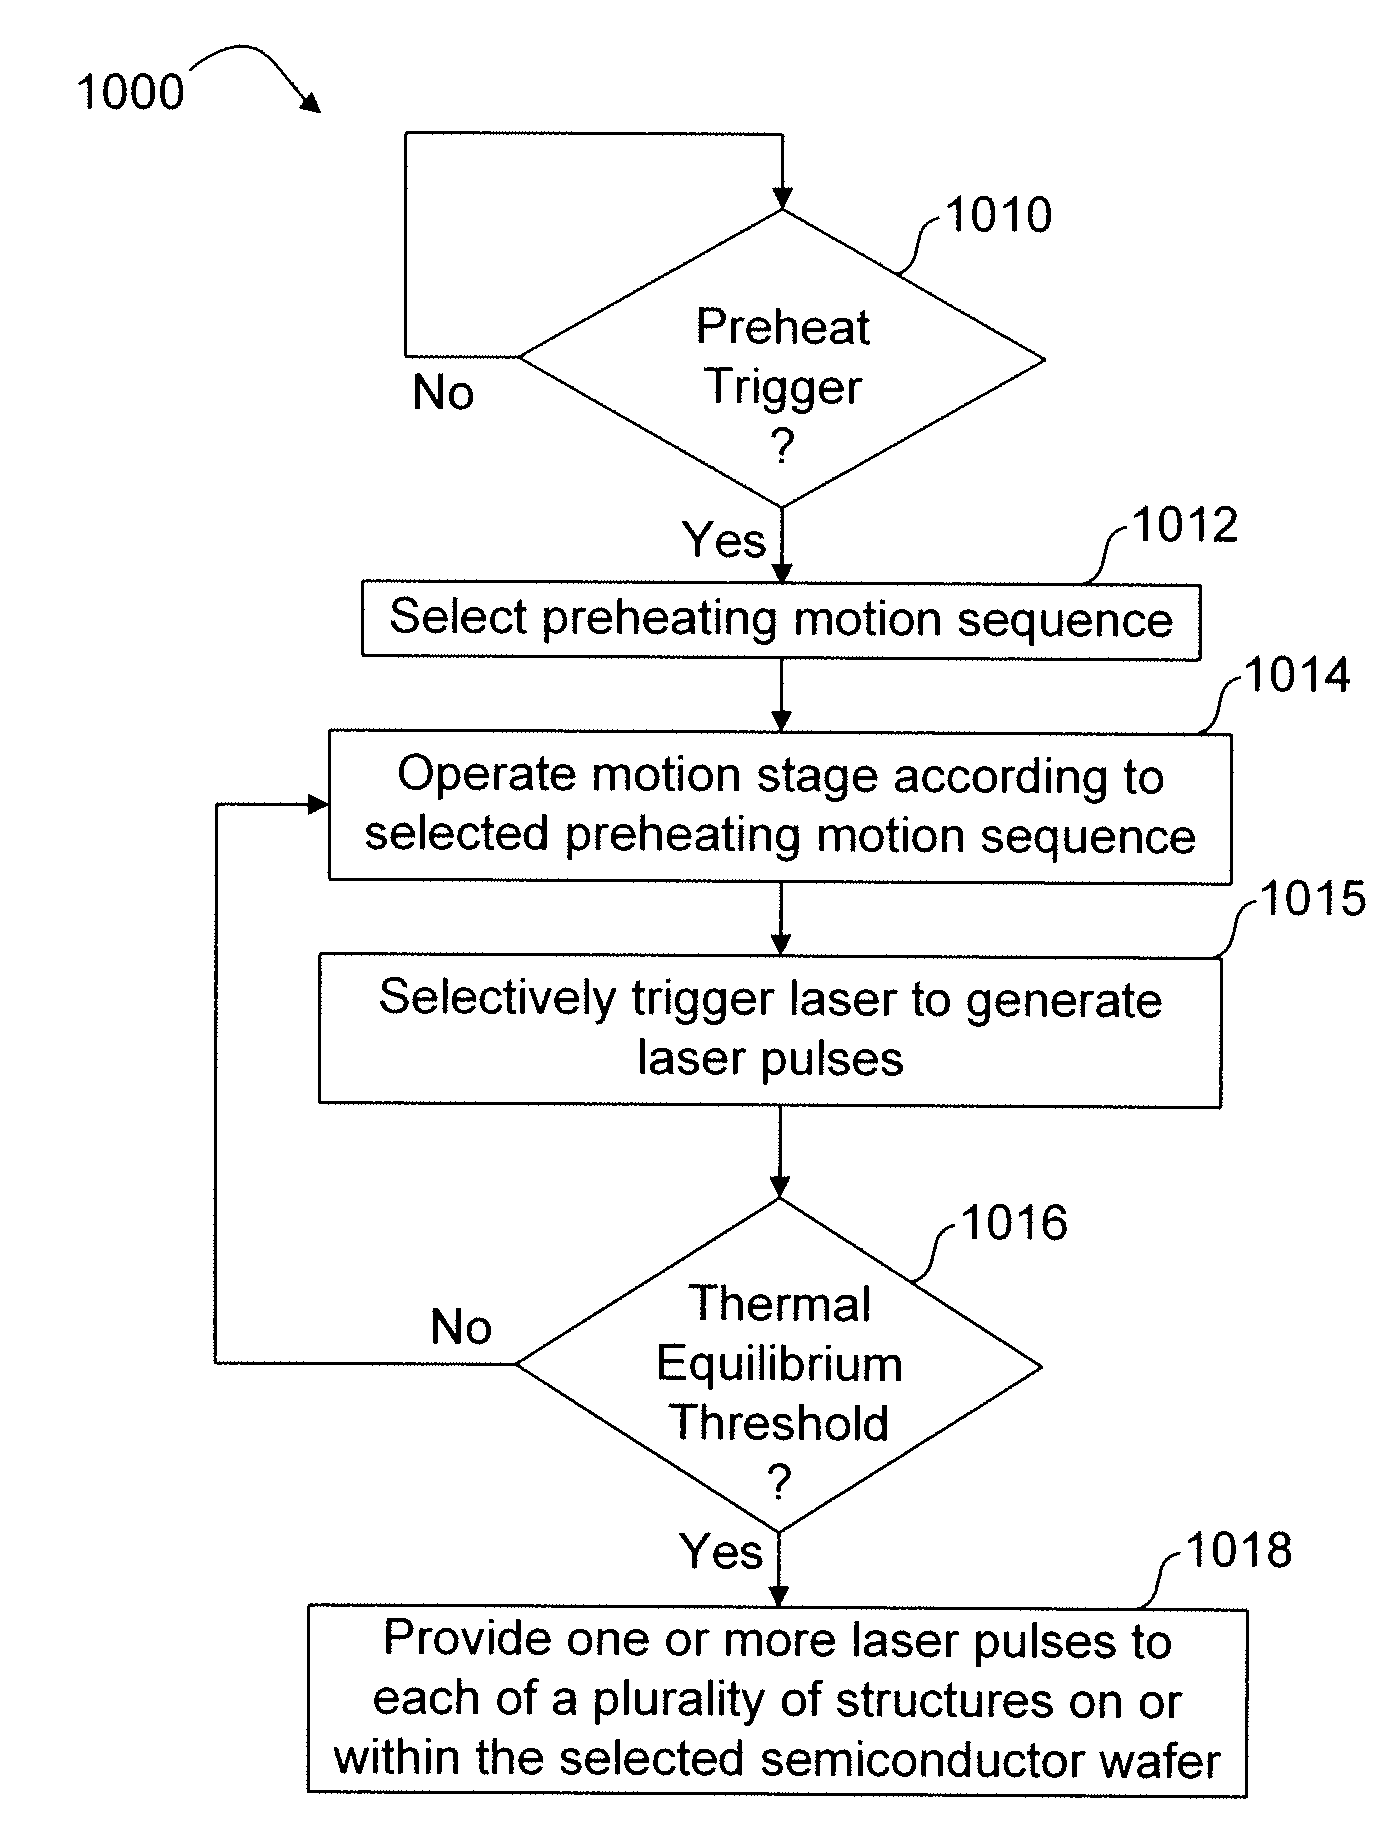 Systems and methods for adapting parameters to increase throughput during laser-based wafer processing